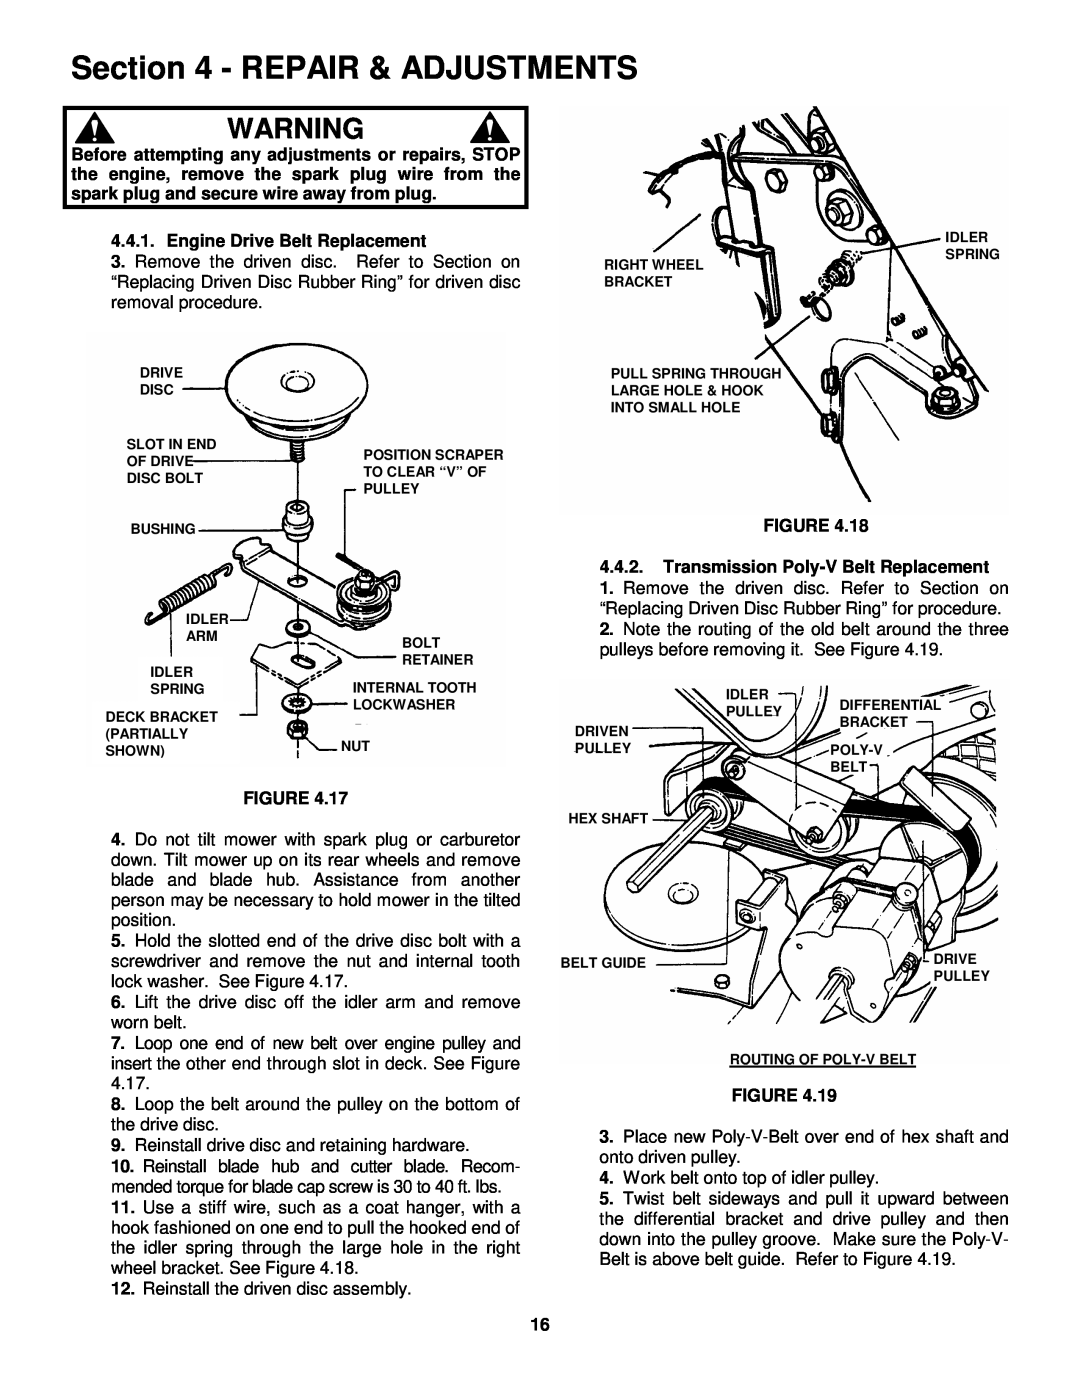 Snapper EFRP216516TV important safety instructions Repair & Adjustments, Engine Drive Belt Replacement 